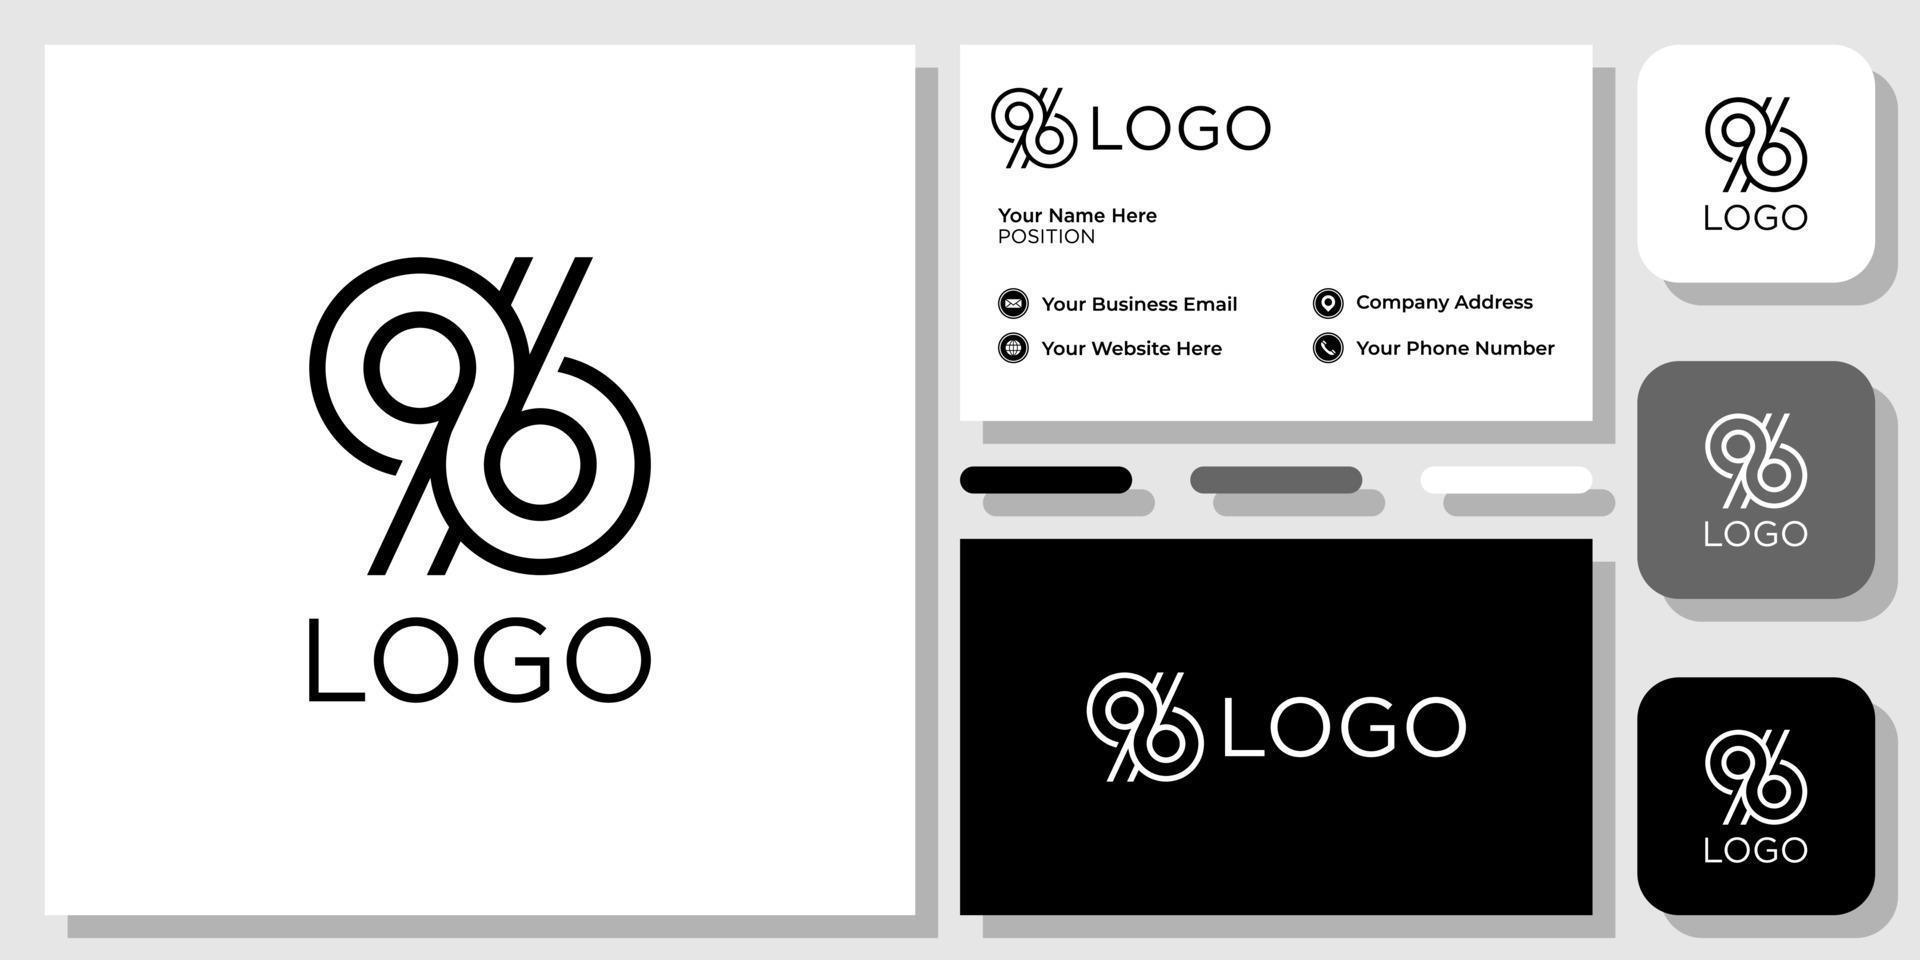 logo 96 number symbol black white with business card template vector